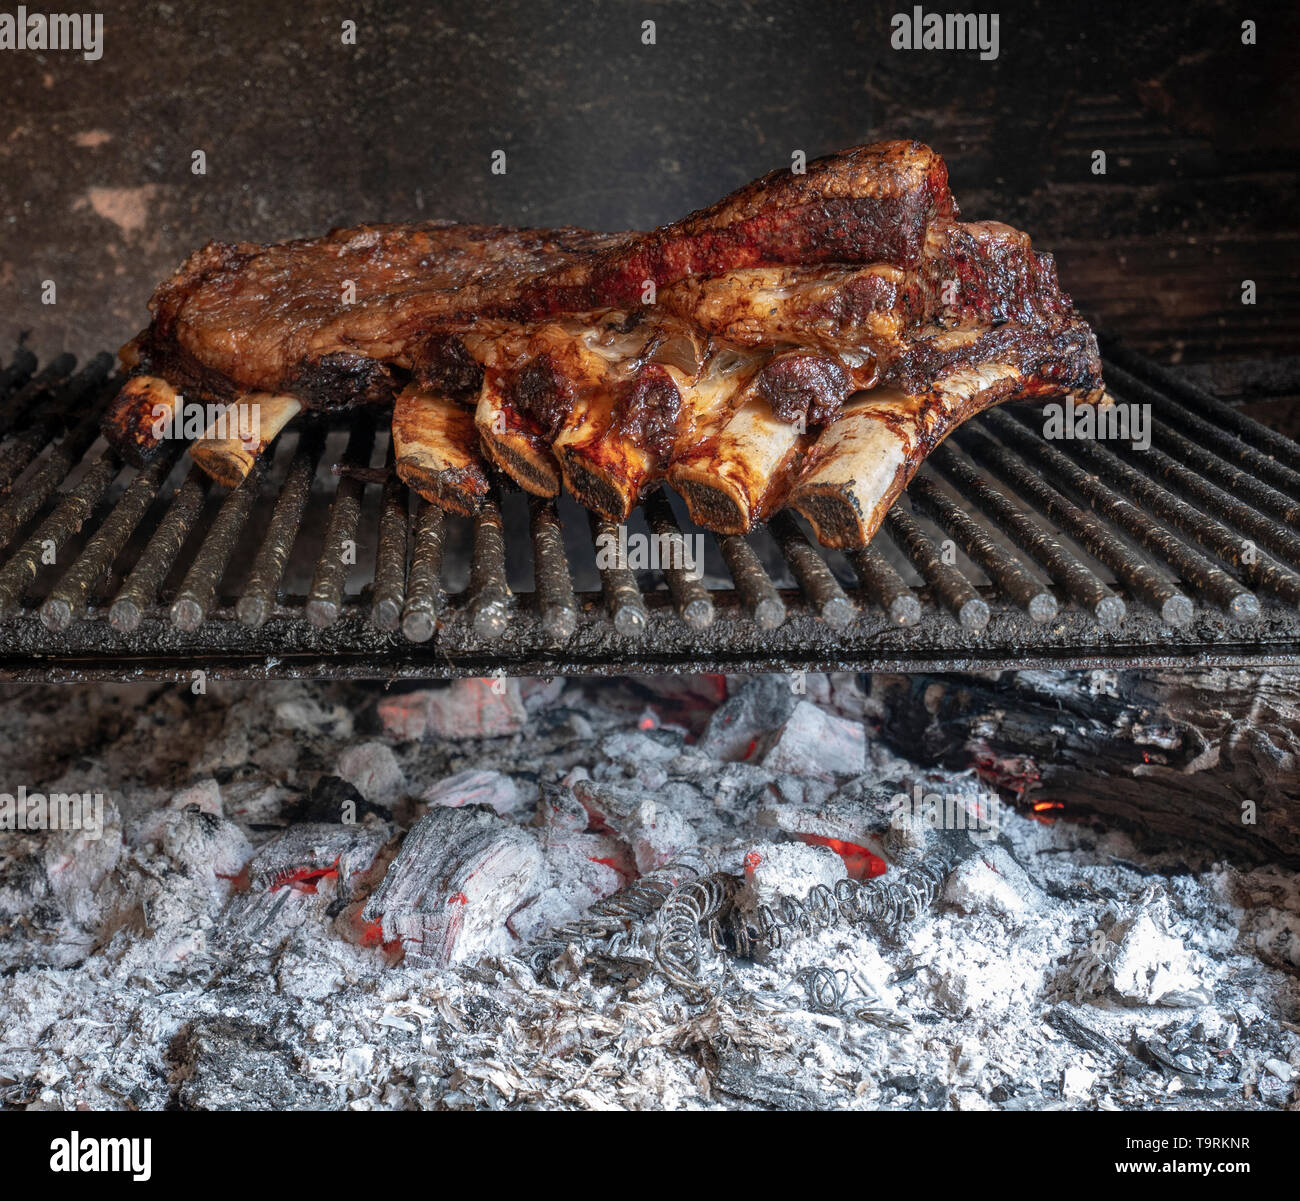 Roast, meat with a typical Argentinean rib cooked on the grill for several hours on a direct fire with charcoal and firewood. Stock Photo